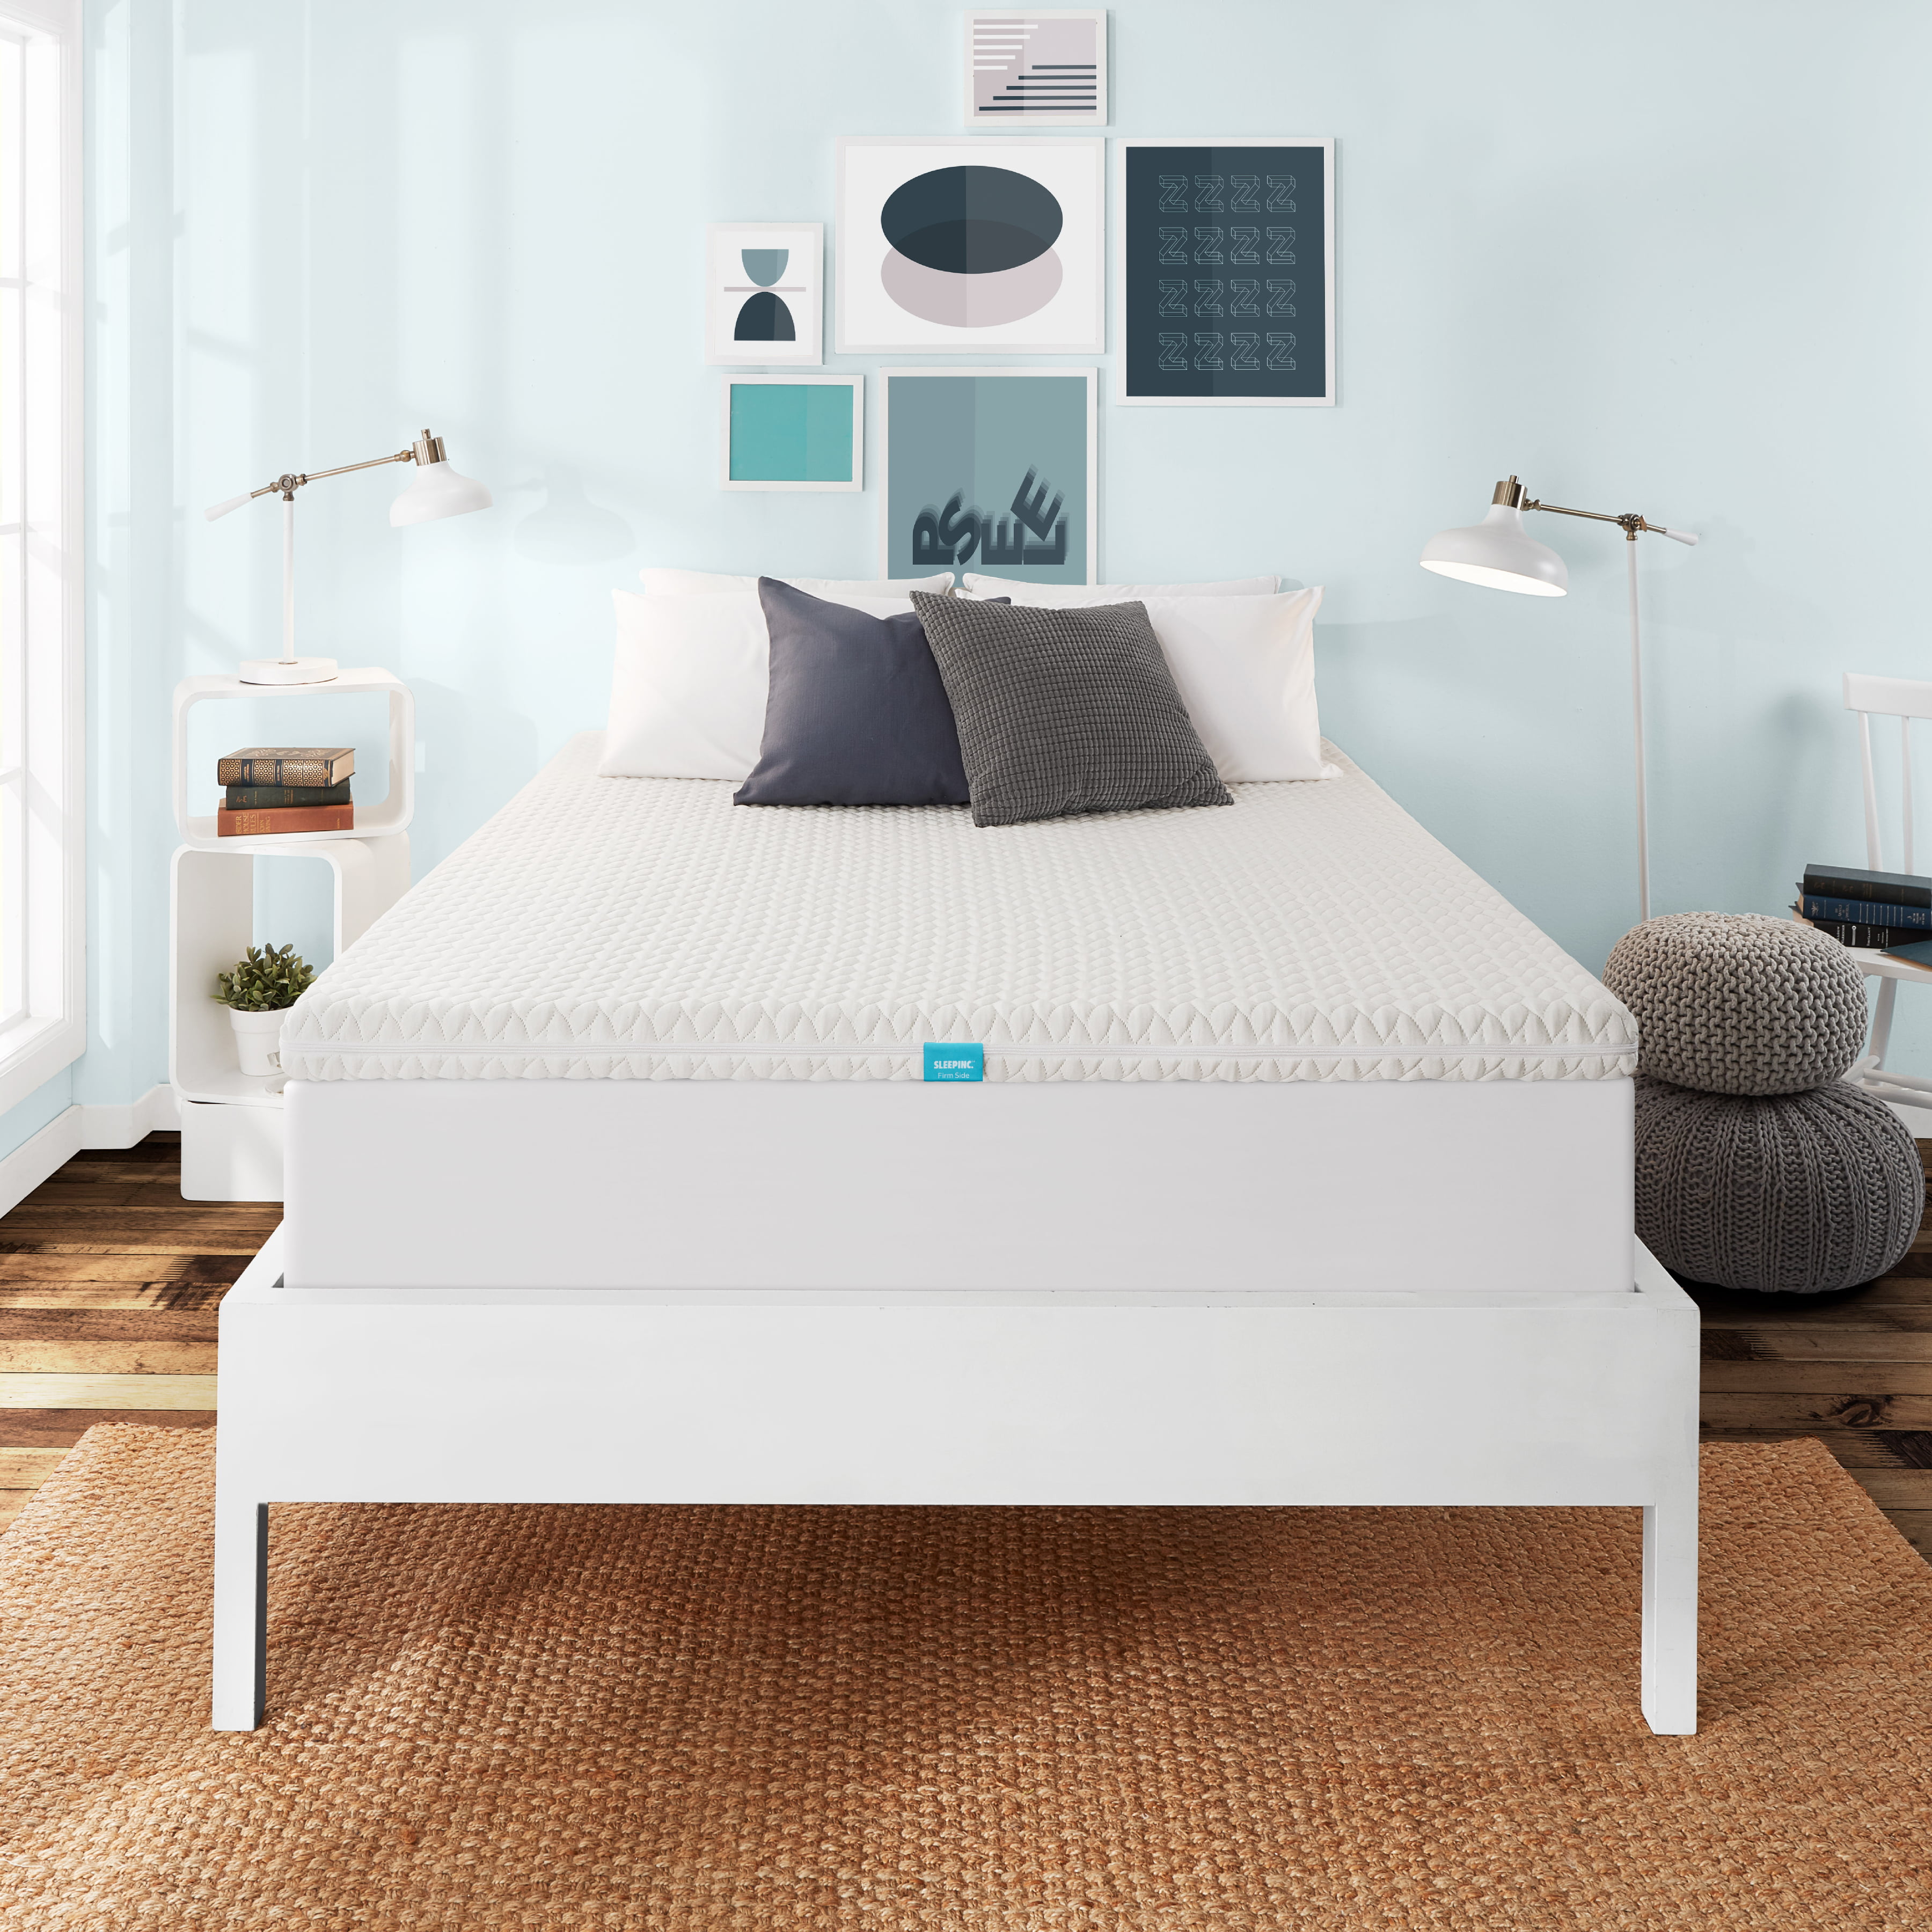 with Bamboo Fiber Mattress Cover,Zipper Closure, Removable and Washable INGALIK 3-Inch Memory Foam Mattress Topper Twin Size Bed Topper